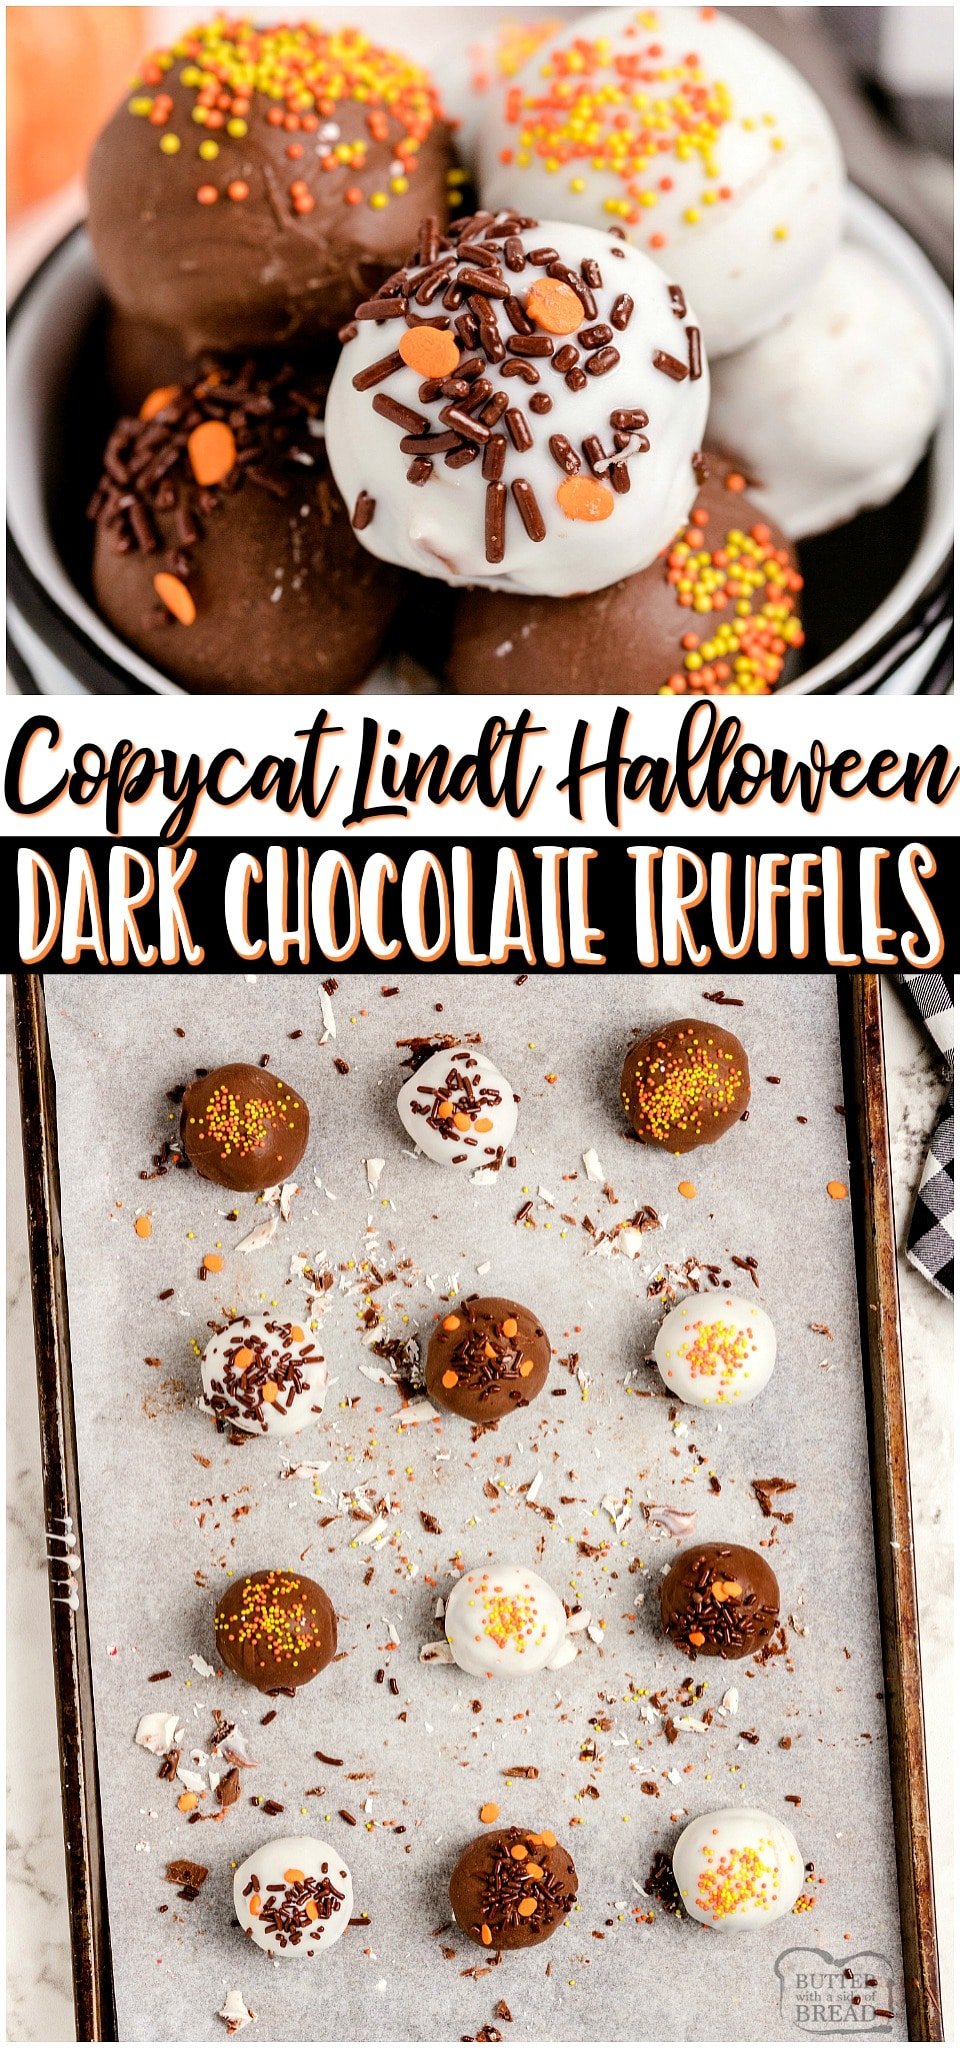 Homemade Halloween Lindt Dark Chocolate Truffles made with just 5 ingredients and SO amazing! Chocolate chips, heavy cream and butter combine for a rich & smooth luscious chocolate truffle filling that rivals Lindt's! Chocolate lovers must try these festive Halloween Truffles!